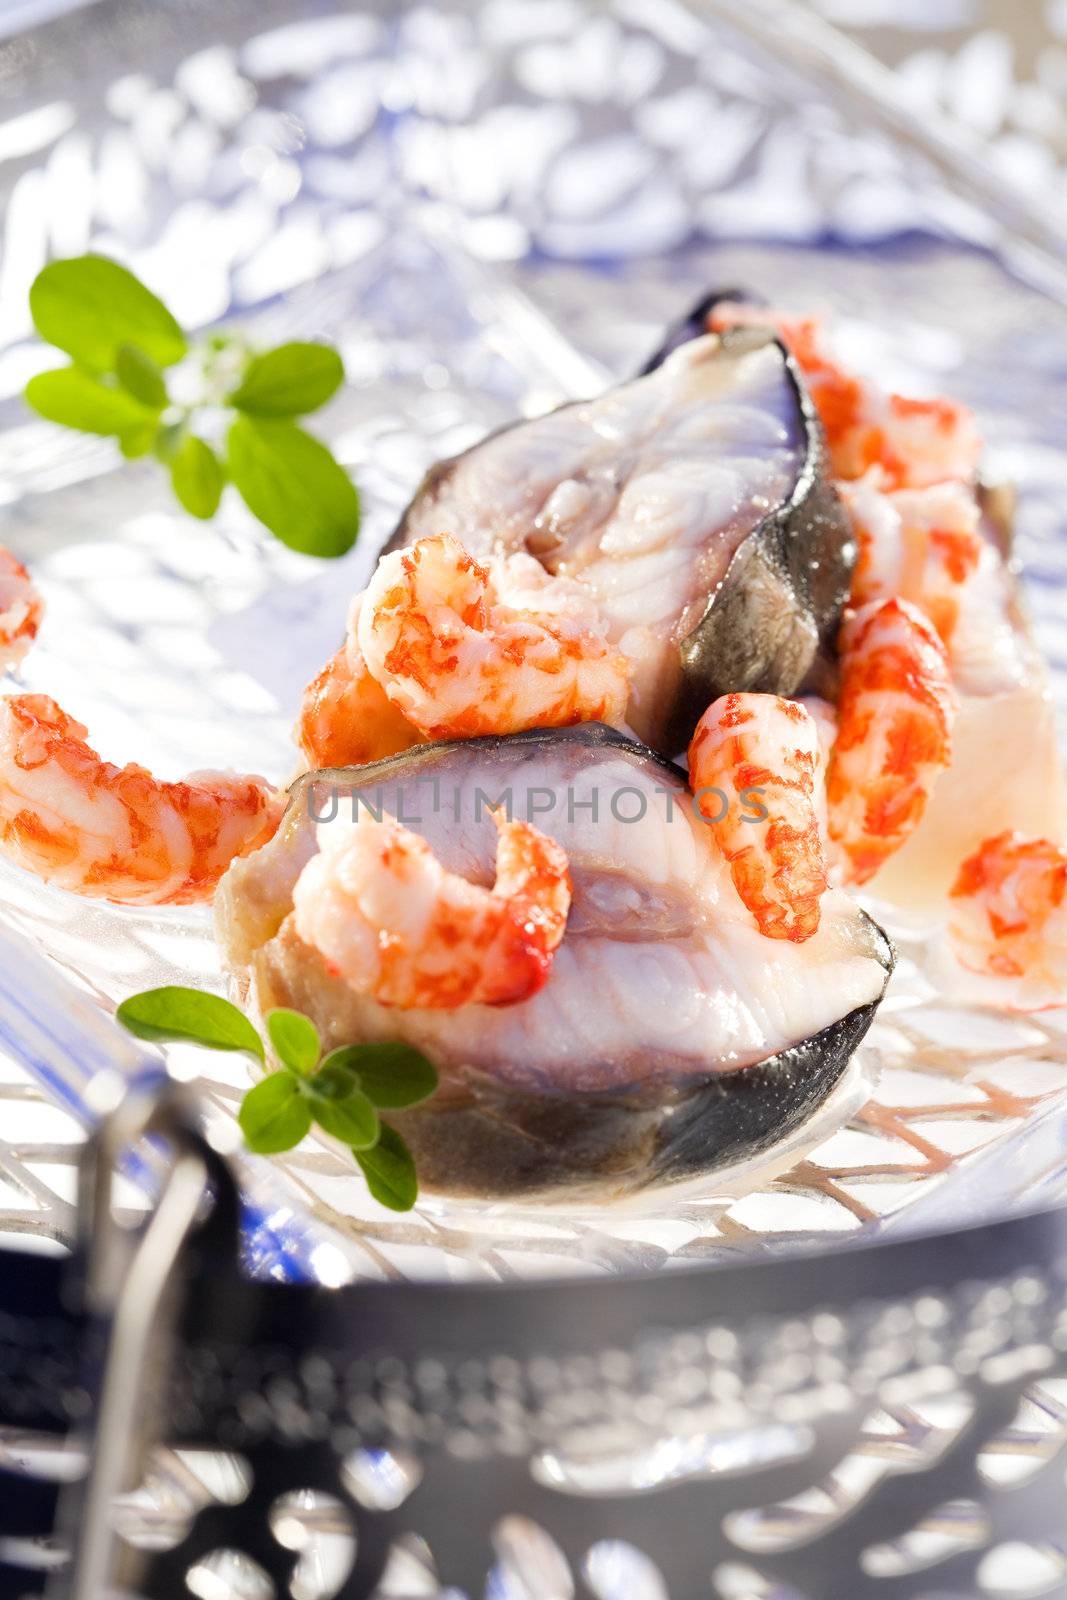 Prawns and fish by Gravicapa